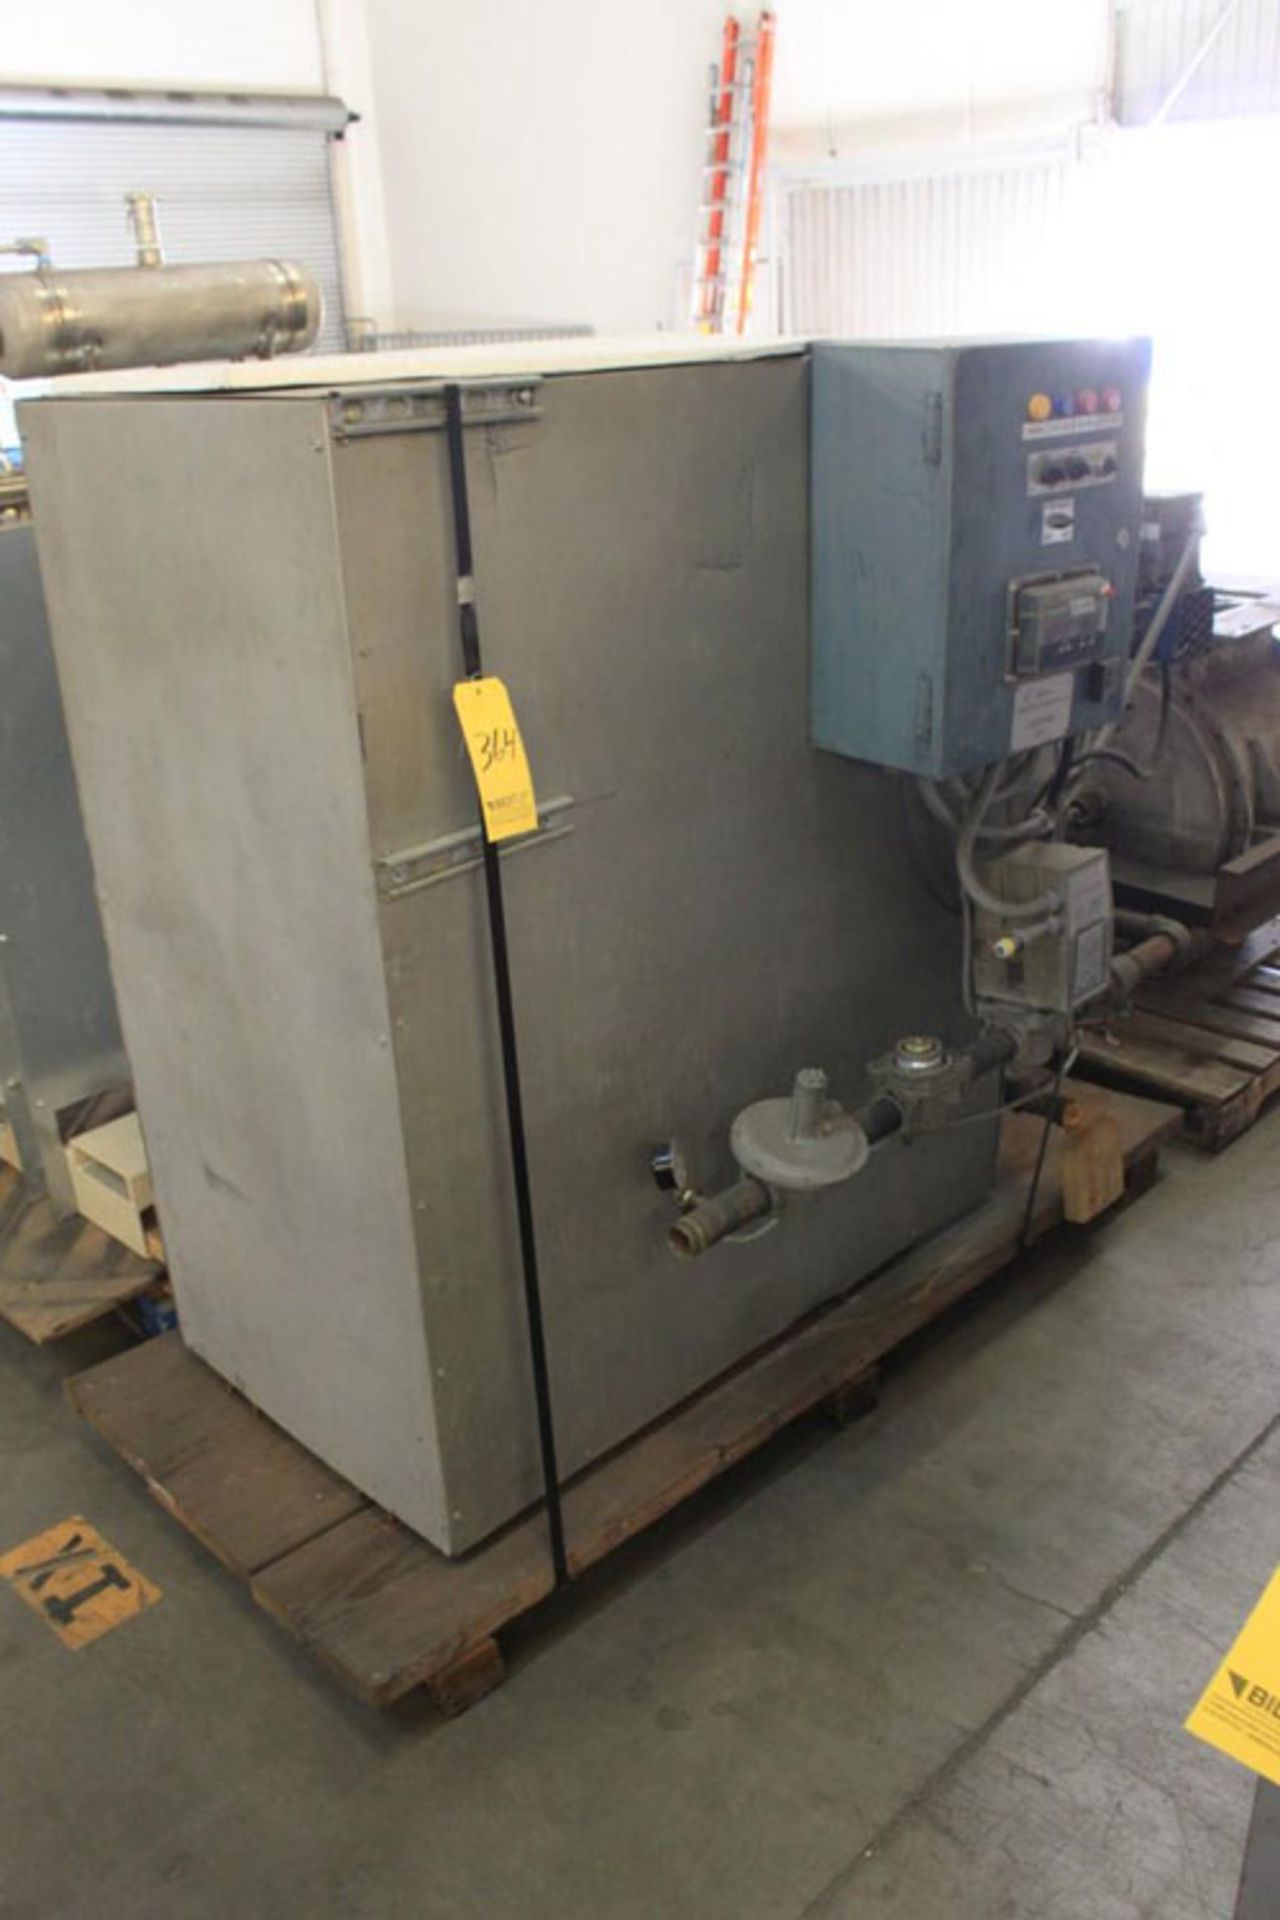 2004 American Combustion Tech Natural Gas Boiler, 3 HP x 15 PSI, Mdl: PO3024, S/N: 271-272,